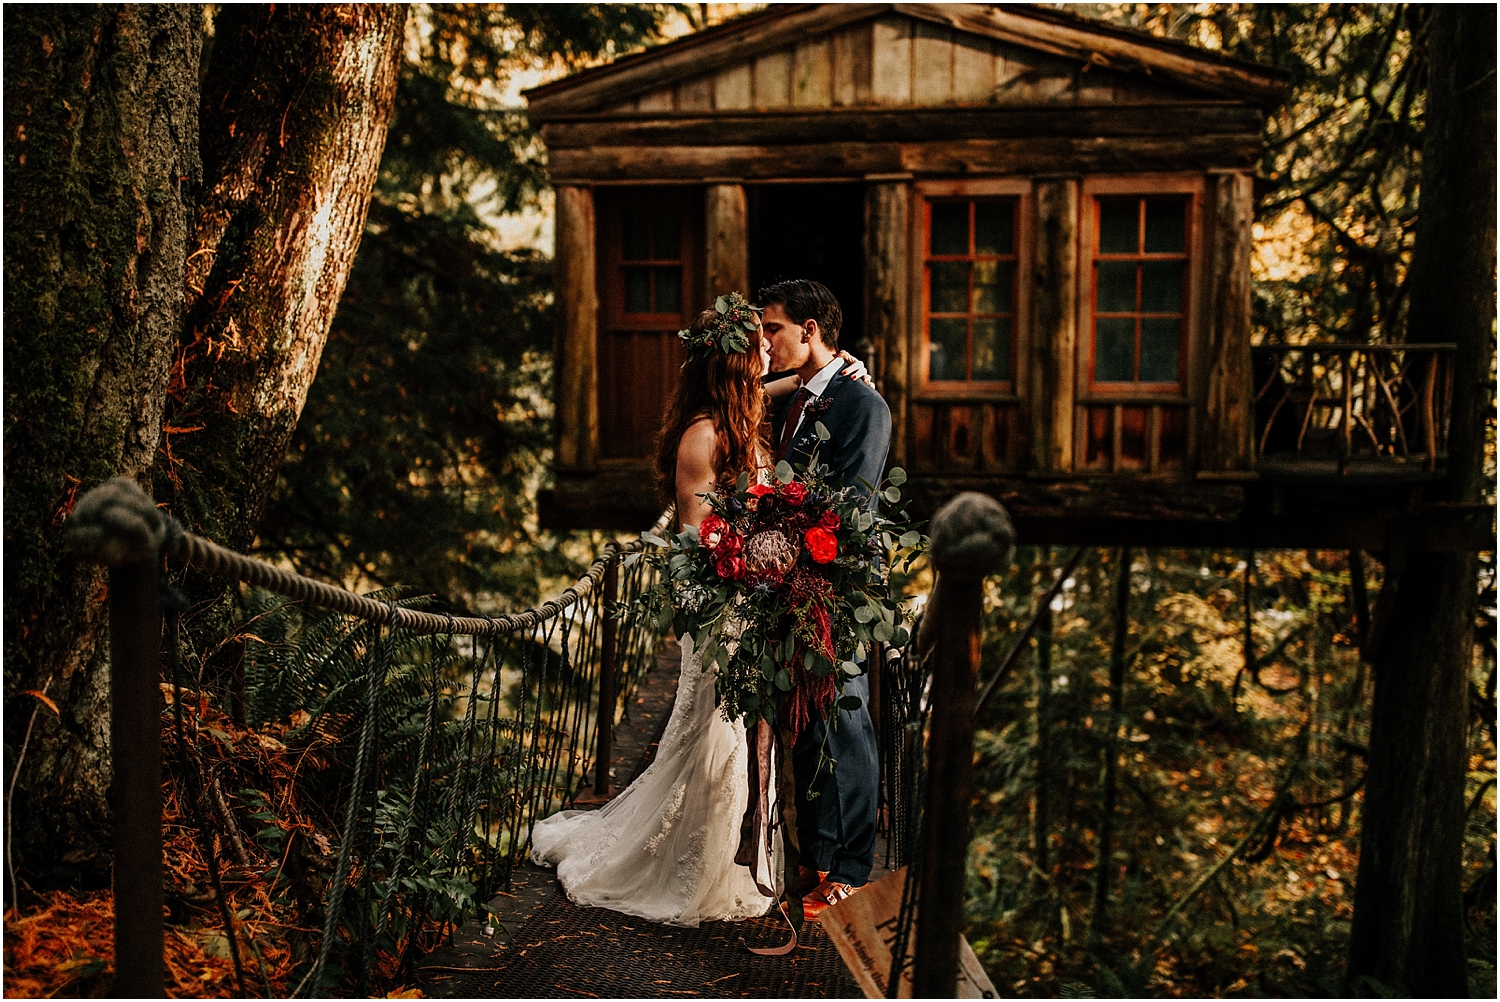 Marc + Kelly’s intimate wedding at Treehouse Point